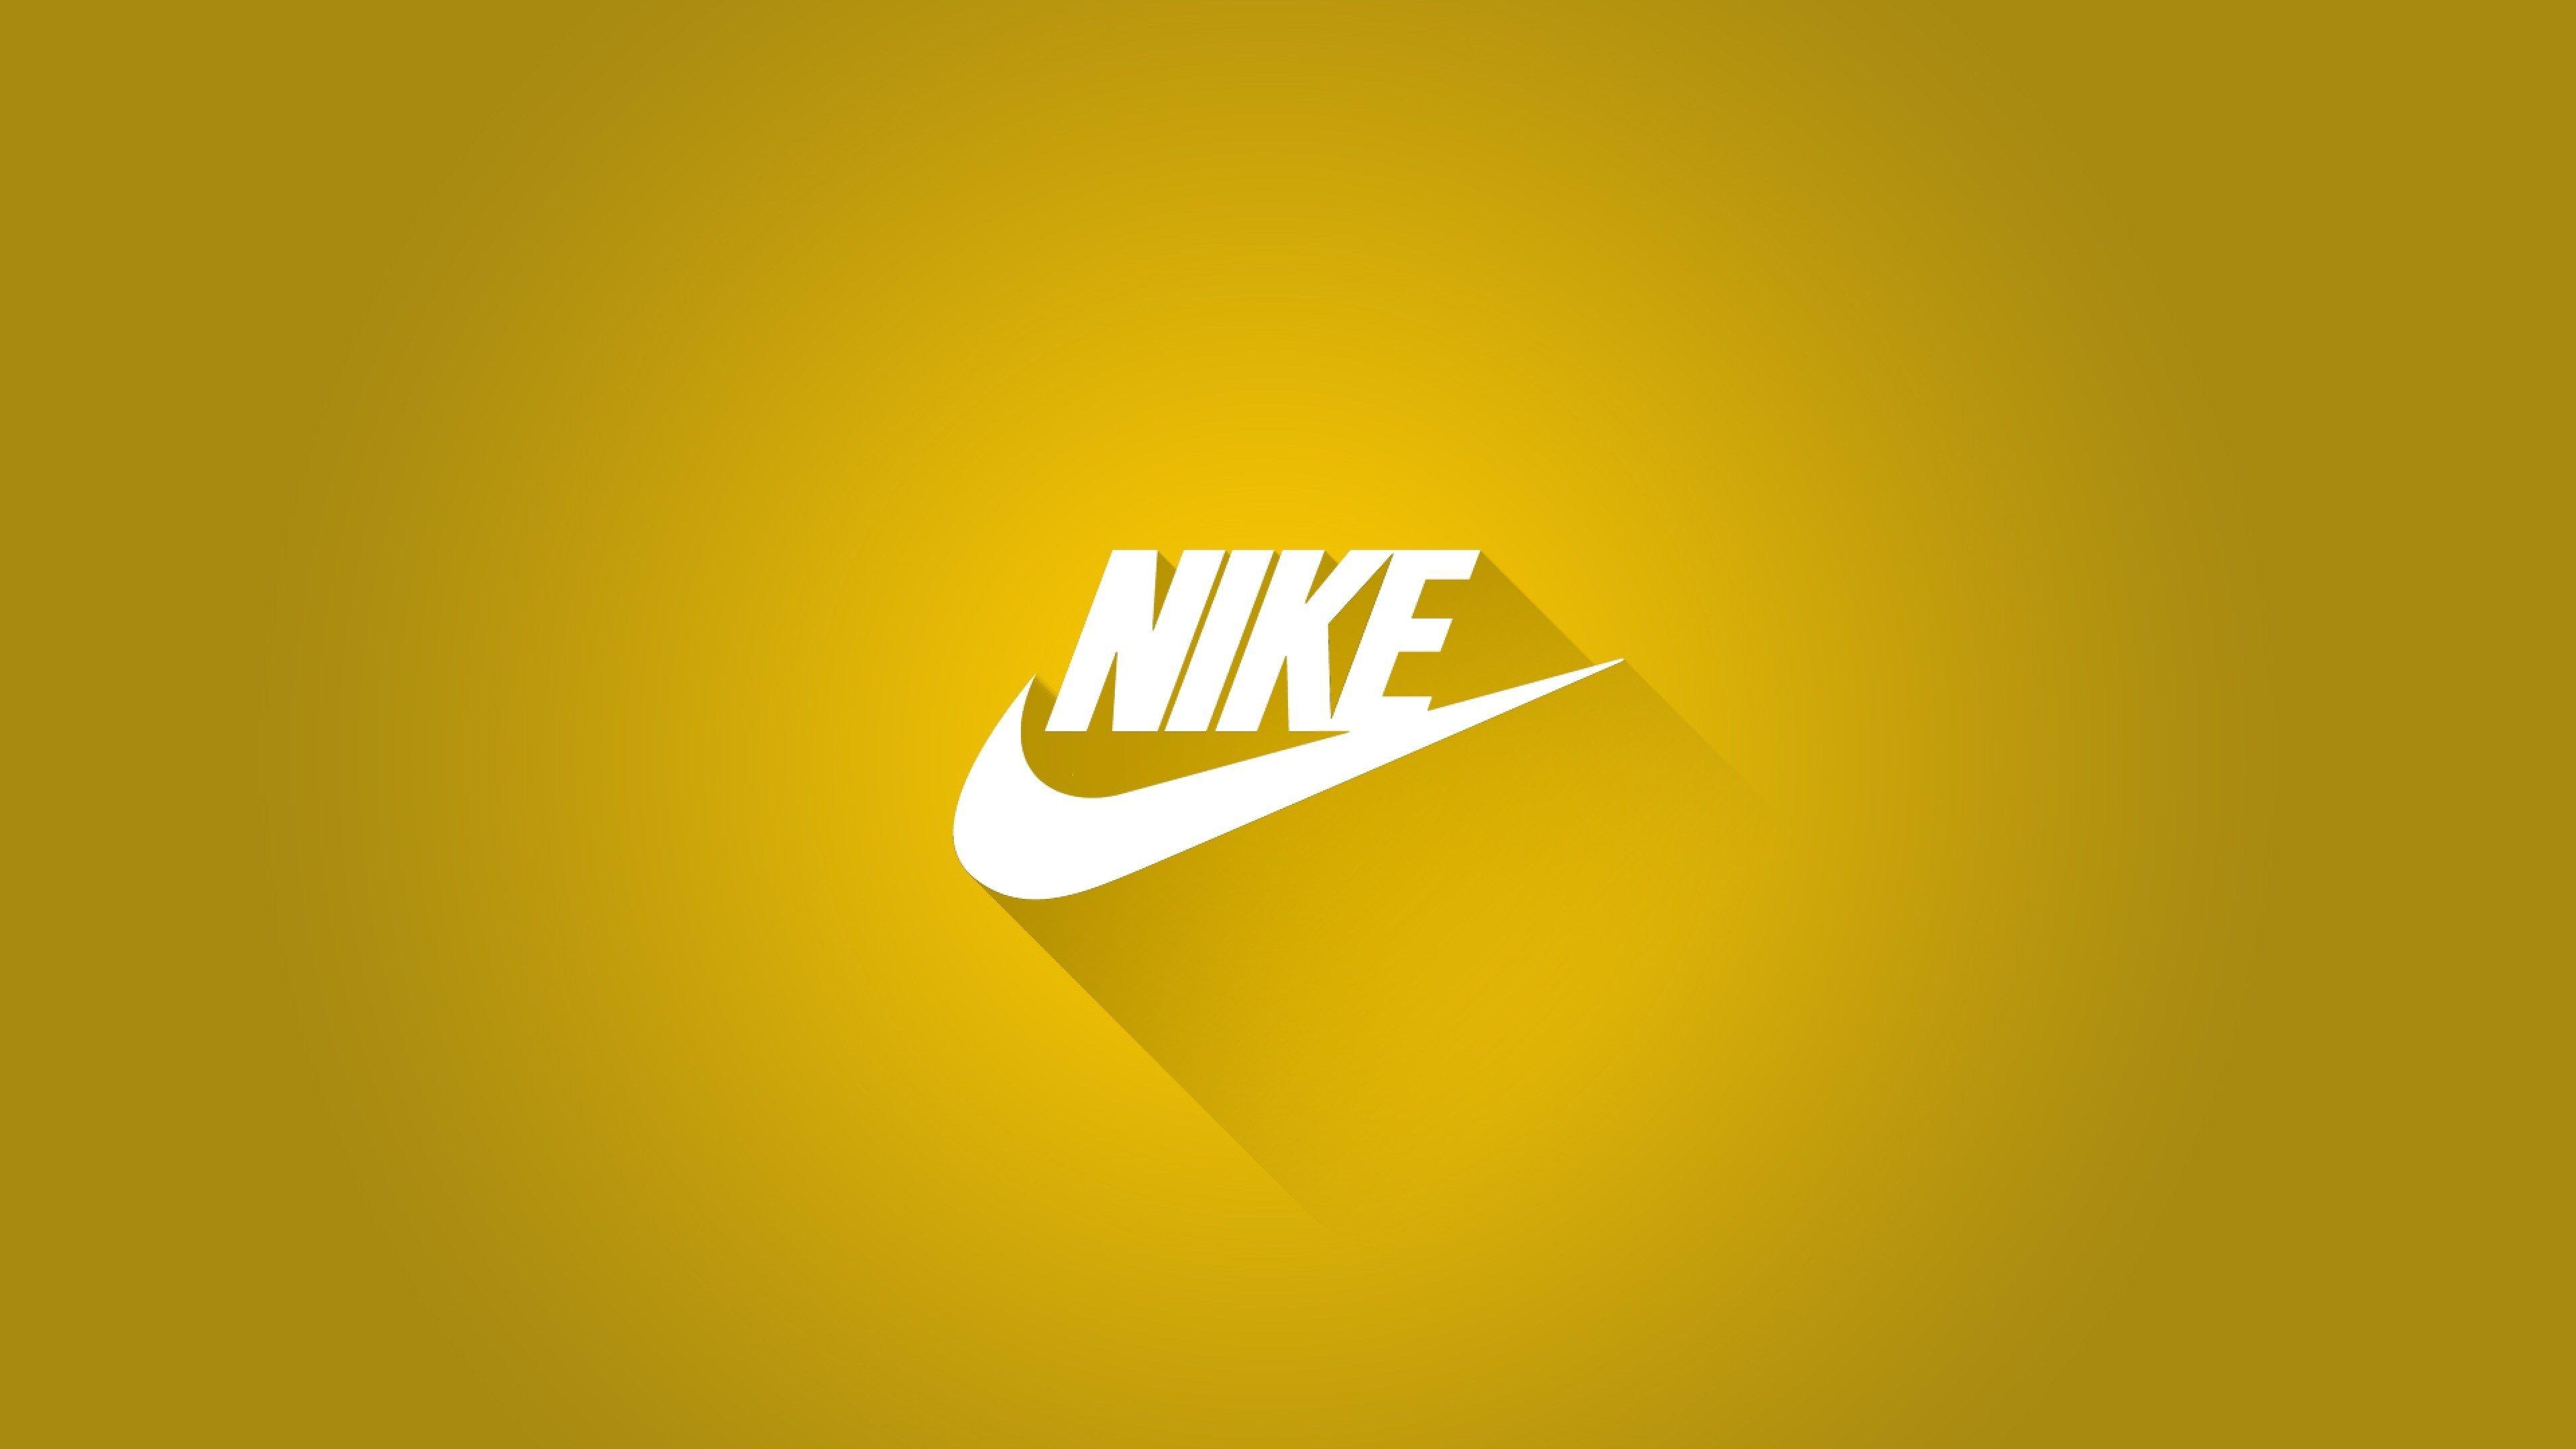 nike 4k wallpaper free download for pc in 2019